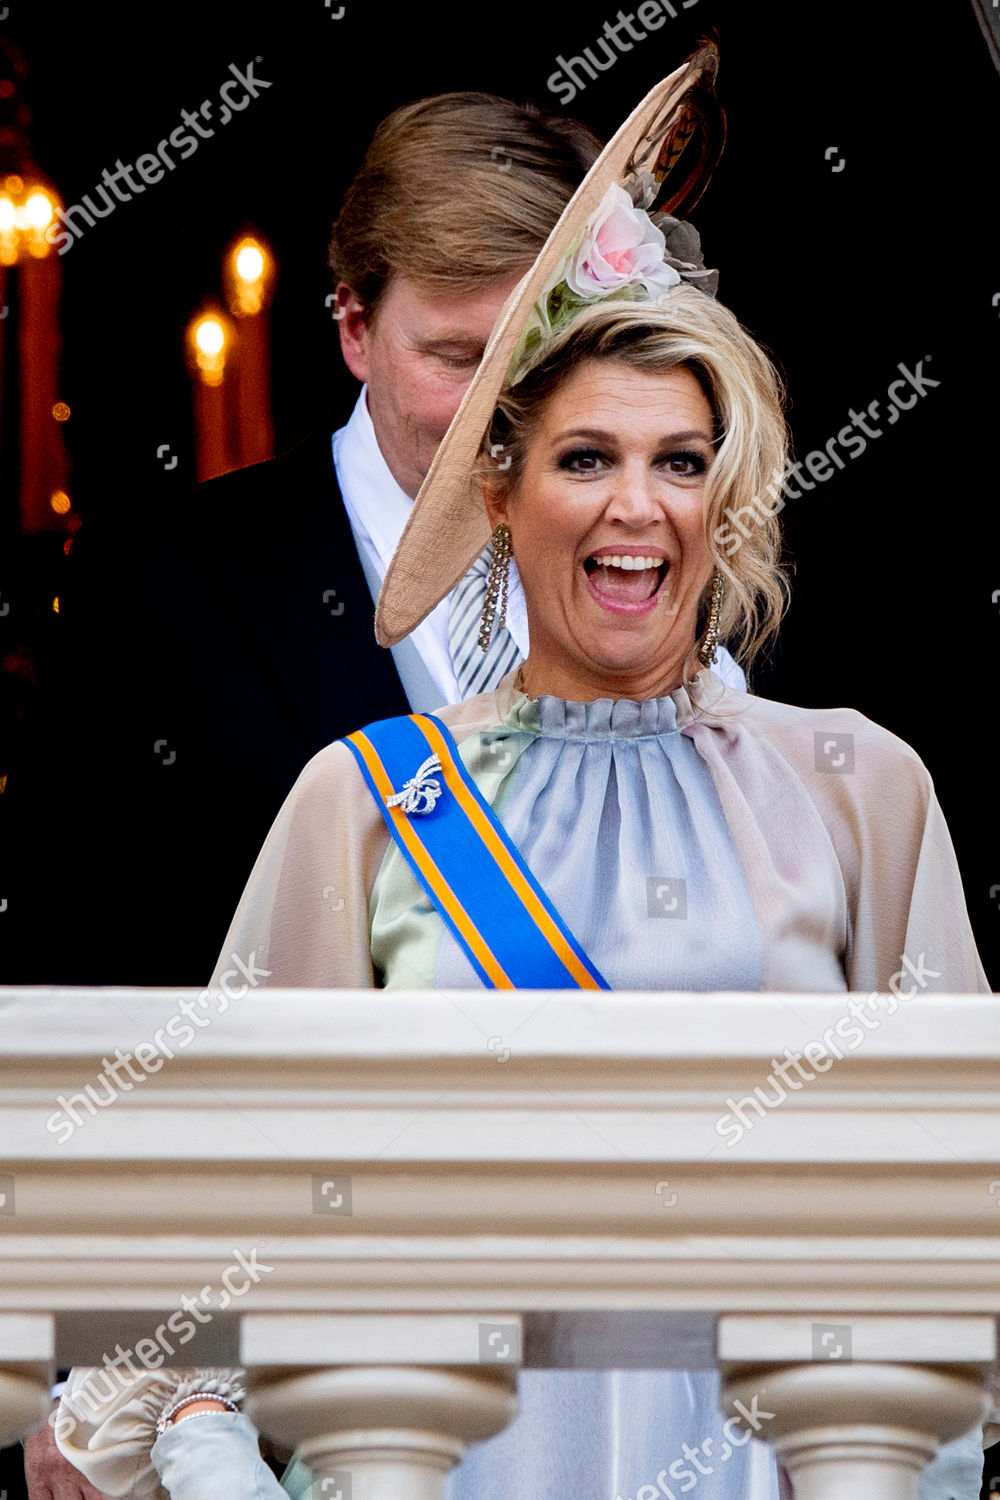 opening-of-the-parliamentary-season-the-hague-the-netherlands-shutterstock-editorial-9885898ac.jpg